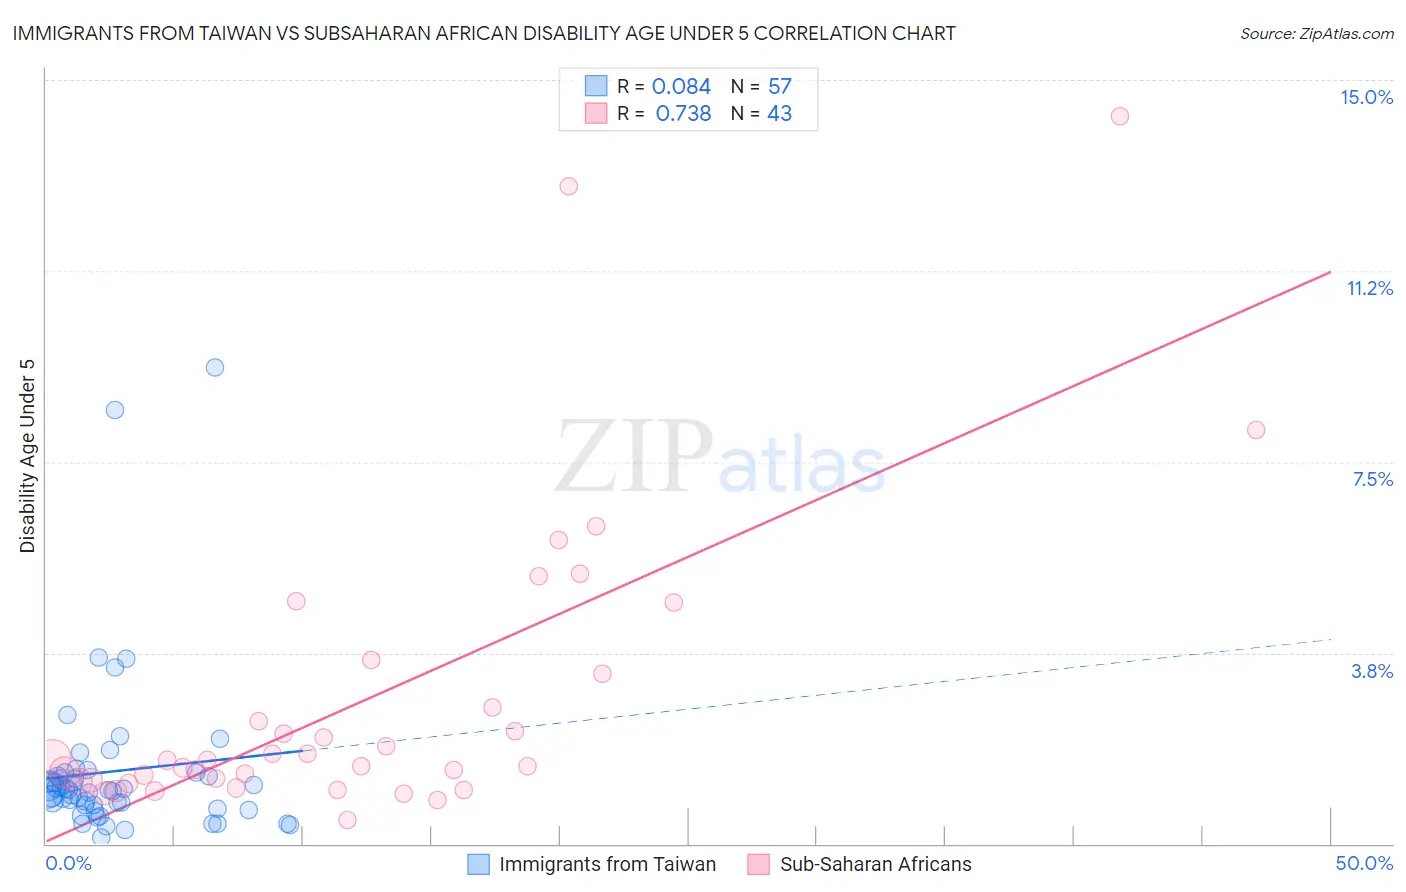 Immigrants from Taiwan vs Subsaharan African Disability Age Under 5